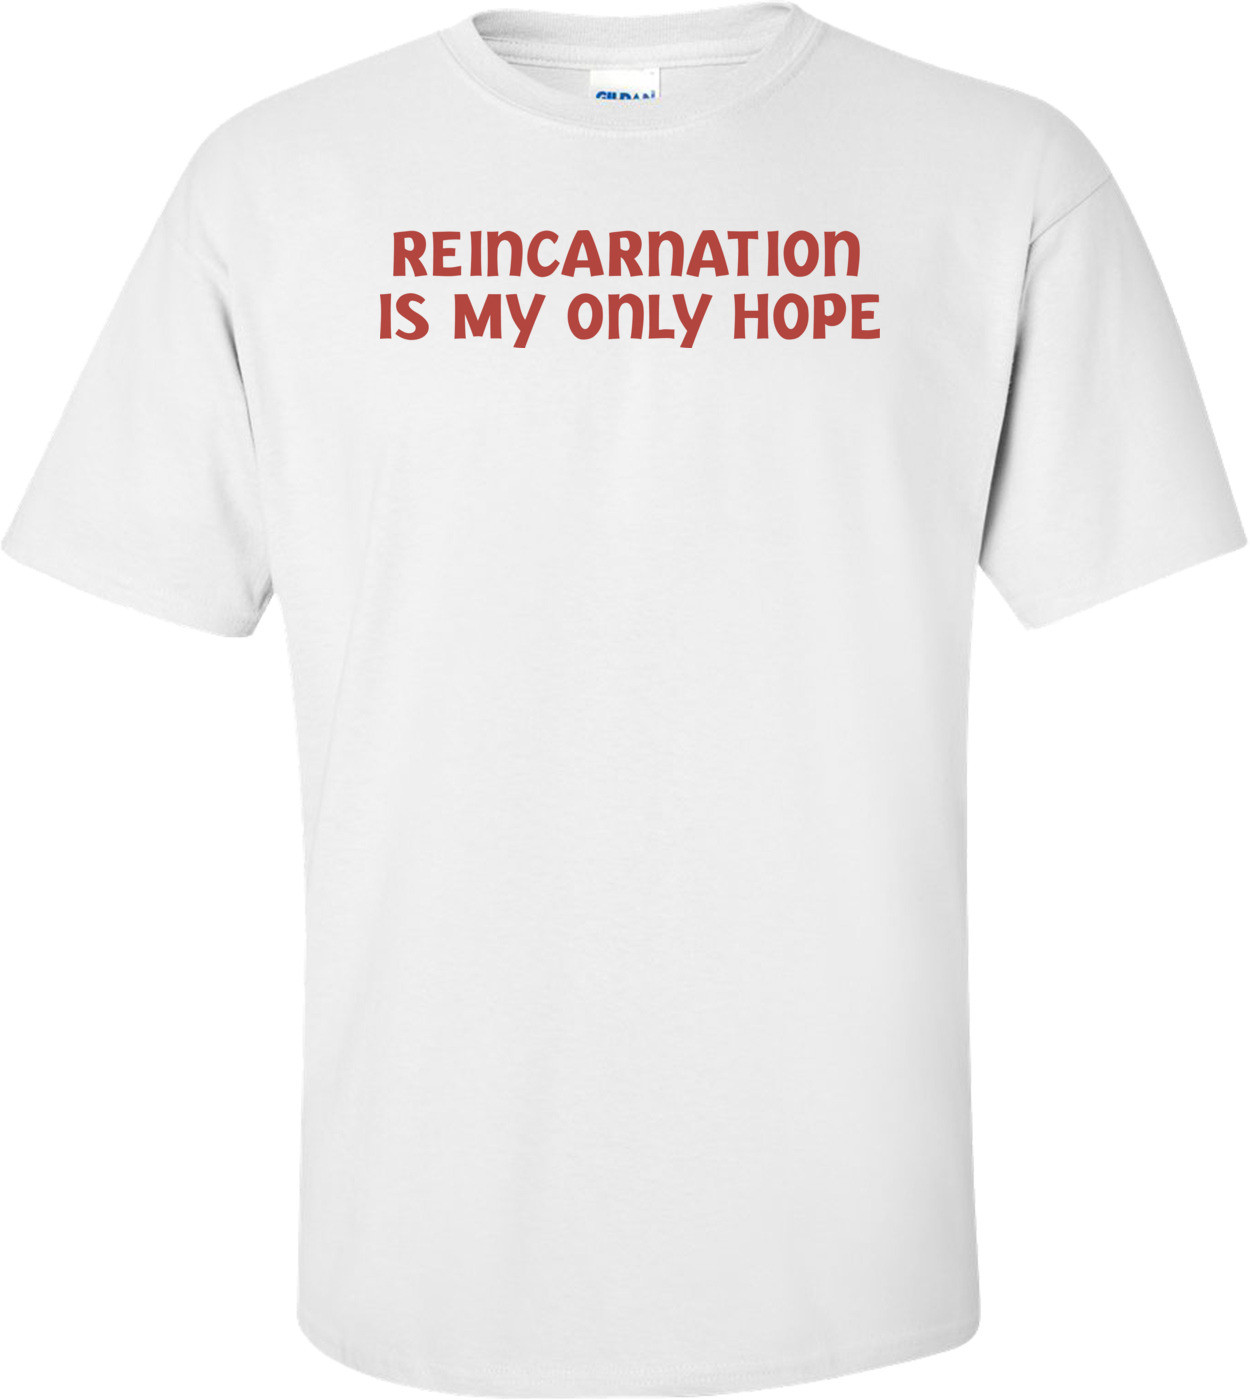 Reincarnation Is My Only Hope T-shirt